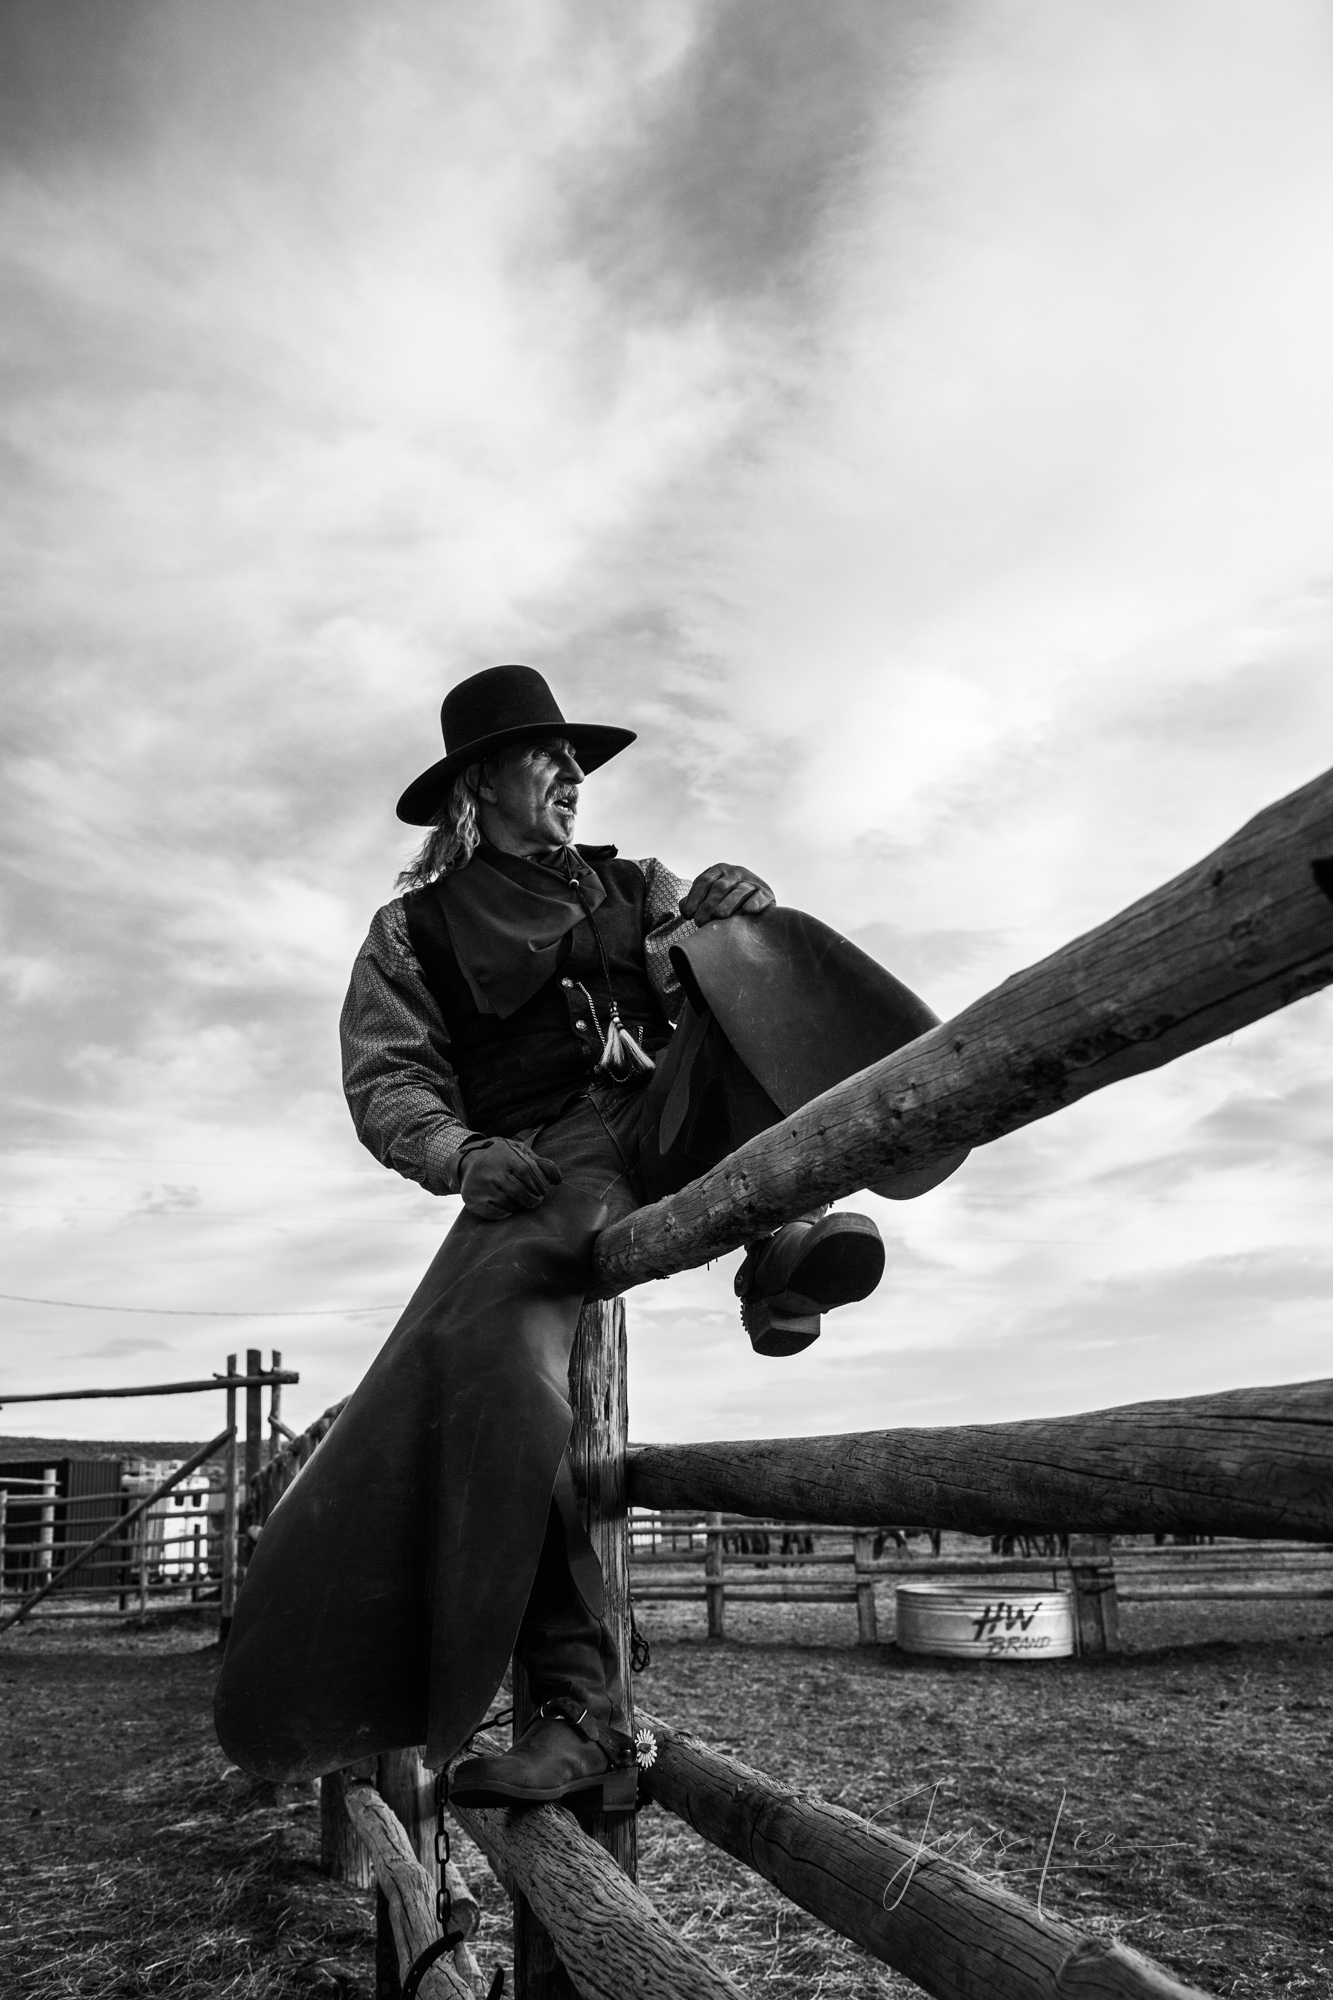 Fine Art Limited Edition Photo Prints of Cowboys, Horses, and life in the West. HEE YAA. A Cowboy picture in black and white....